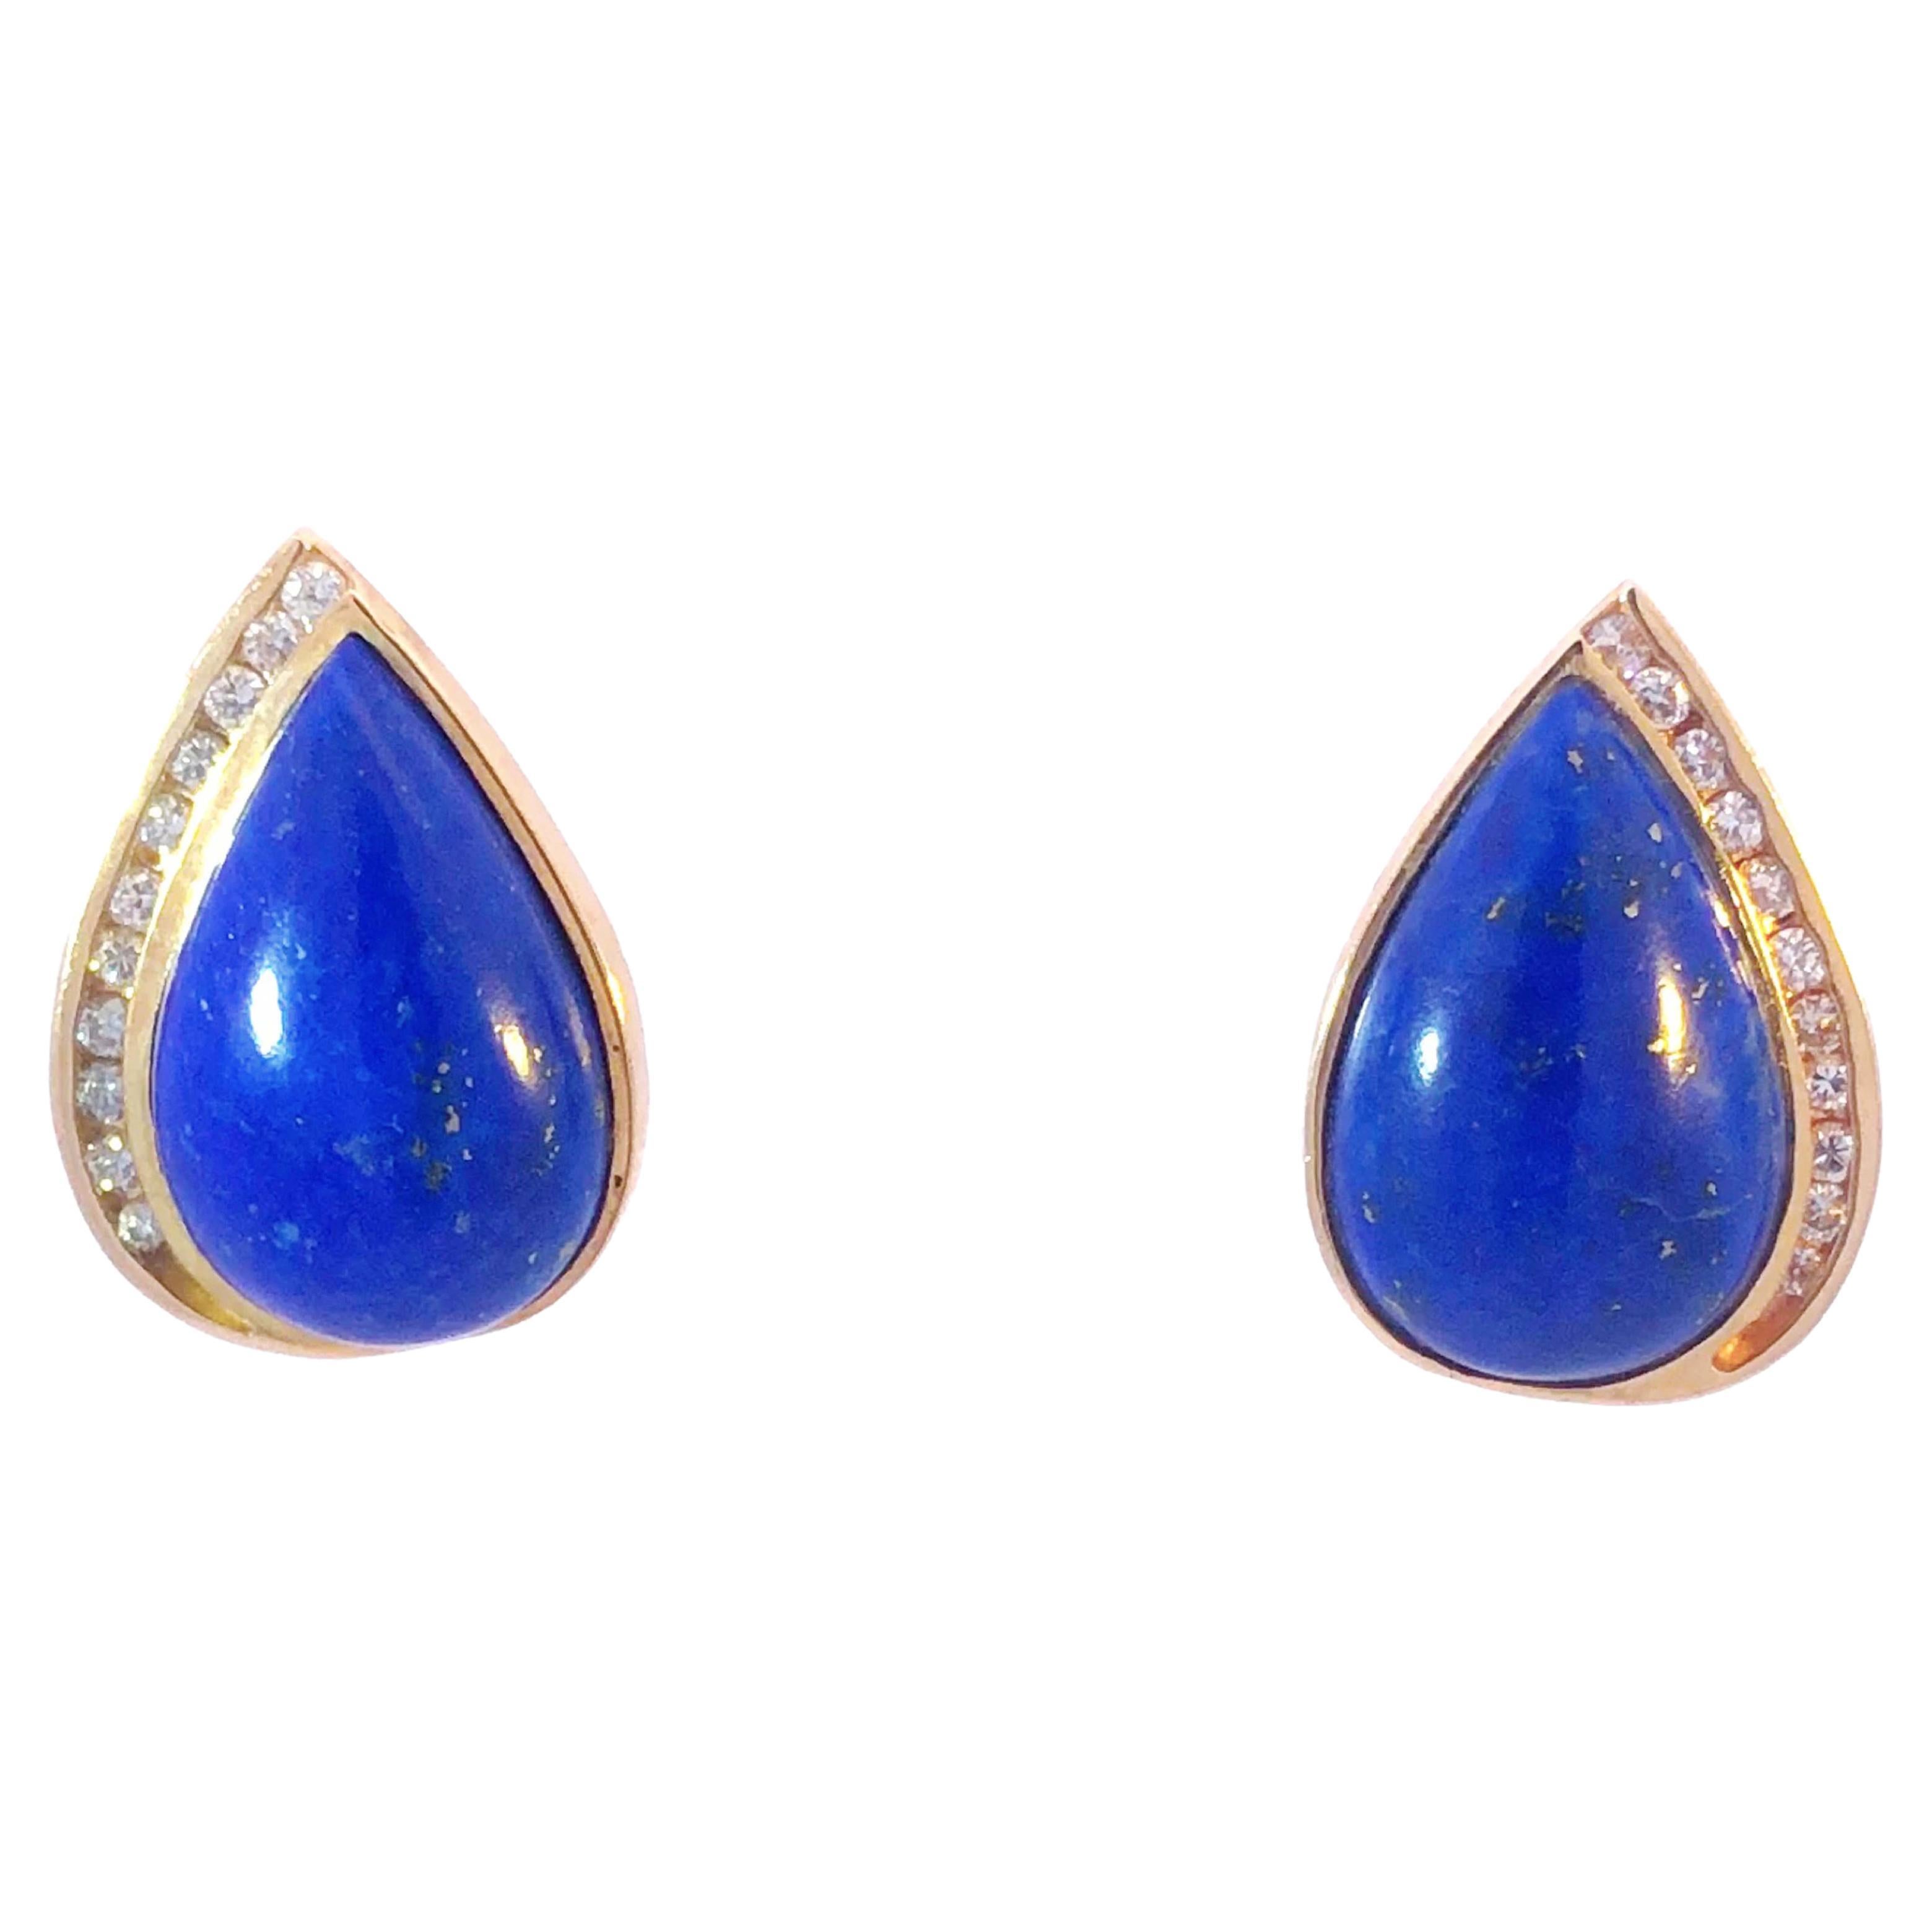 Vintage Lapis Lazuli and Diamond Pear Shape Earrings in 14K Yellow Gold